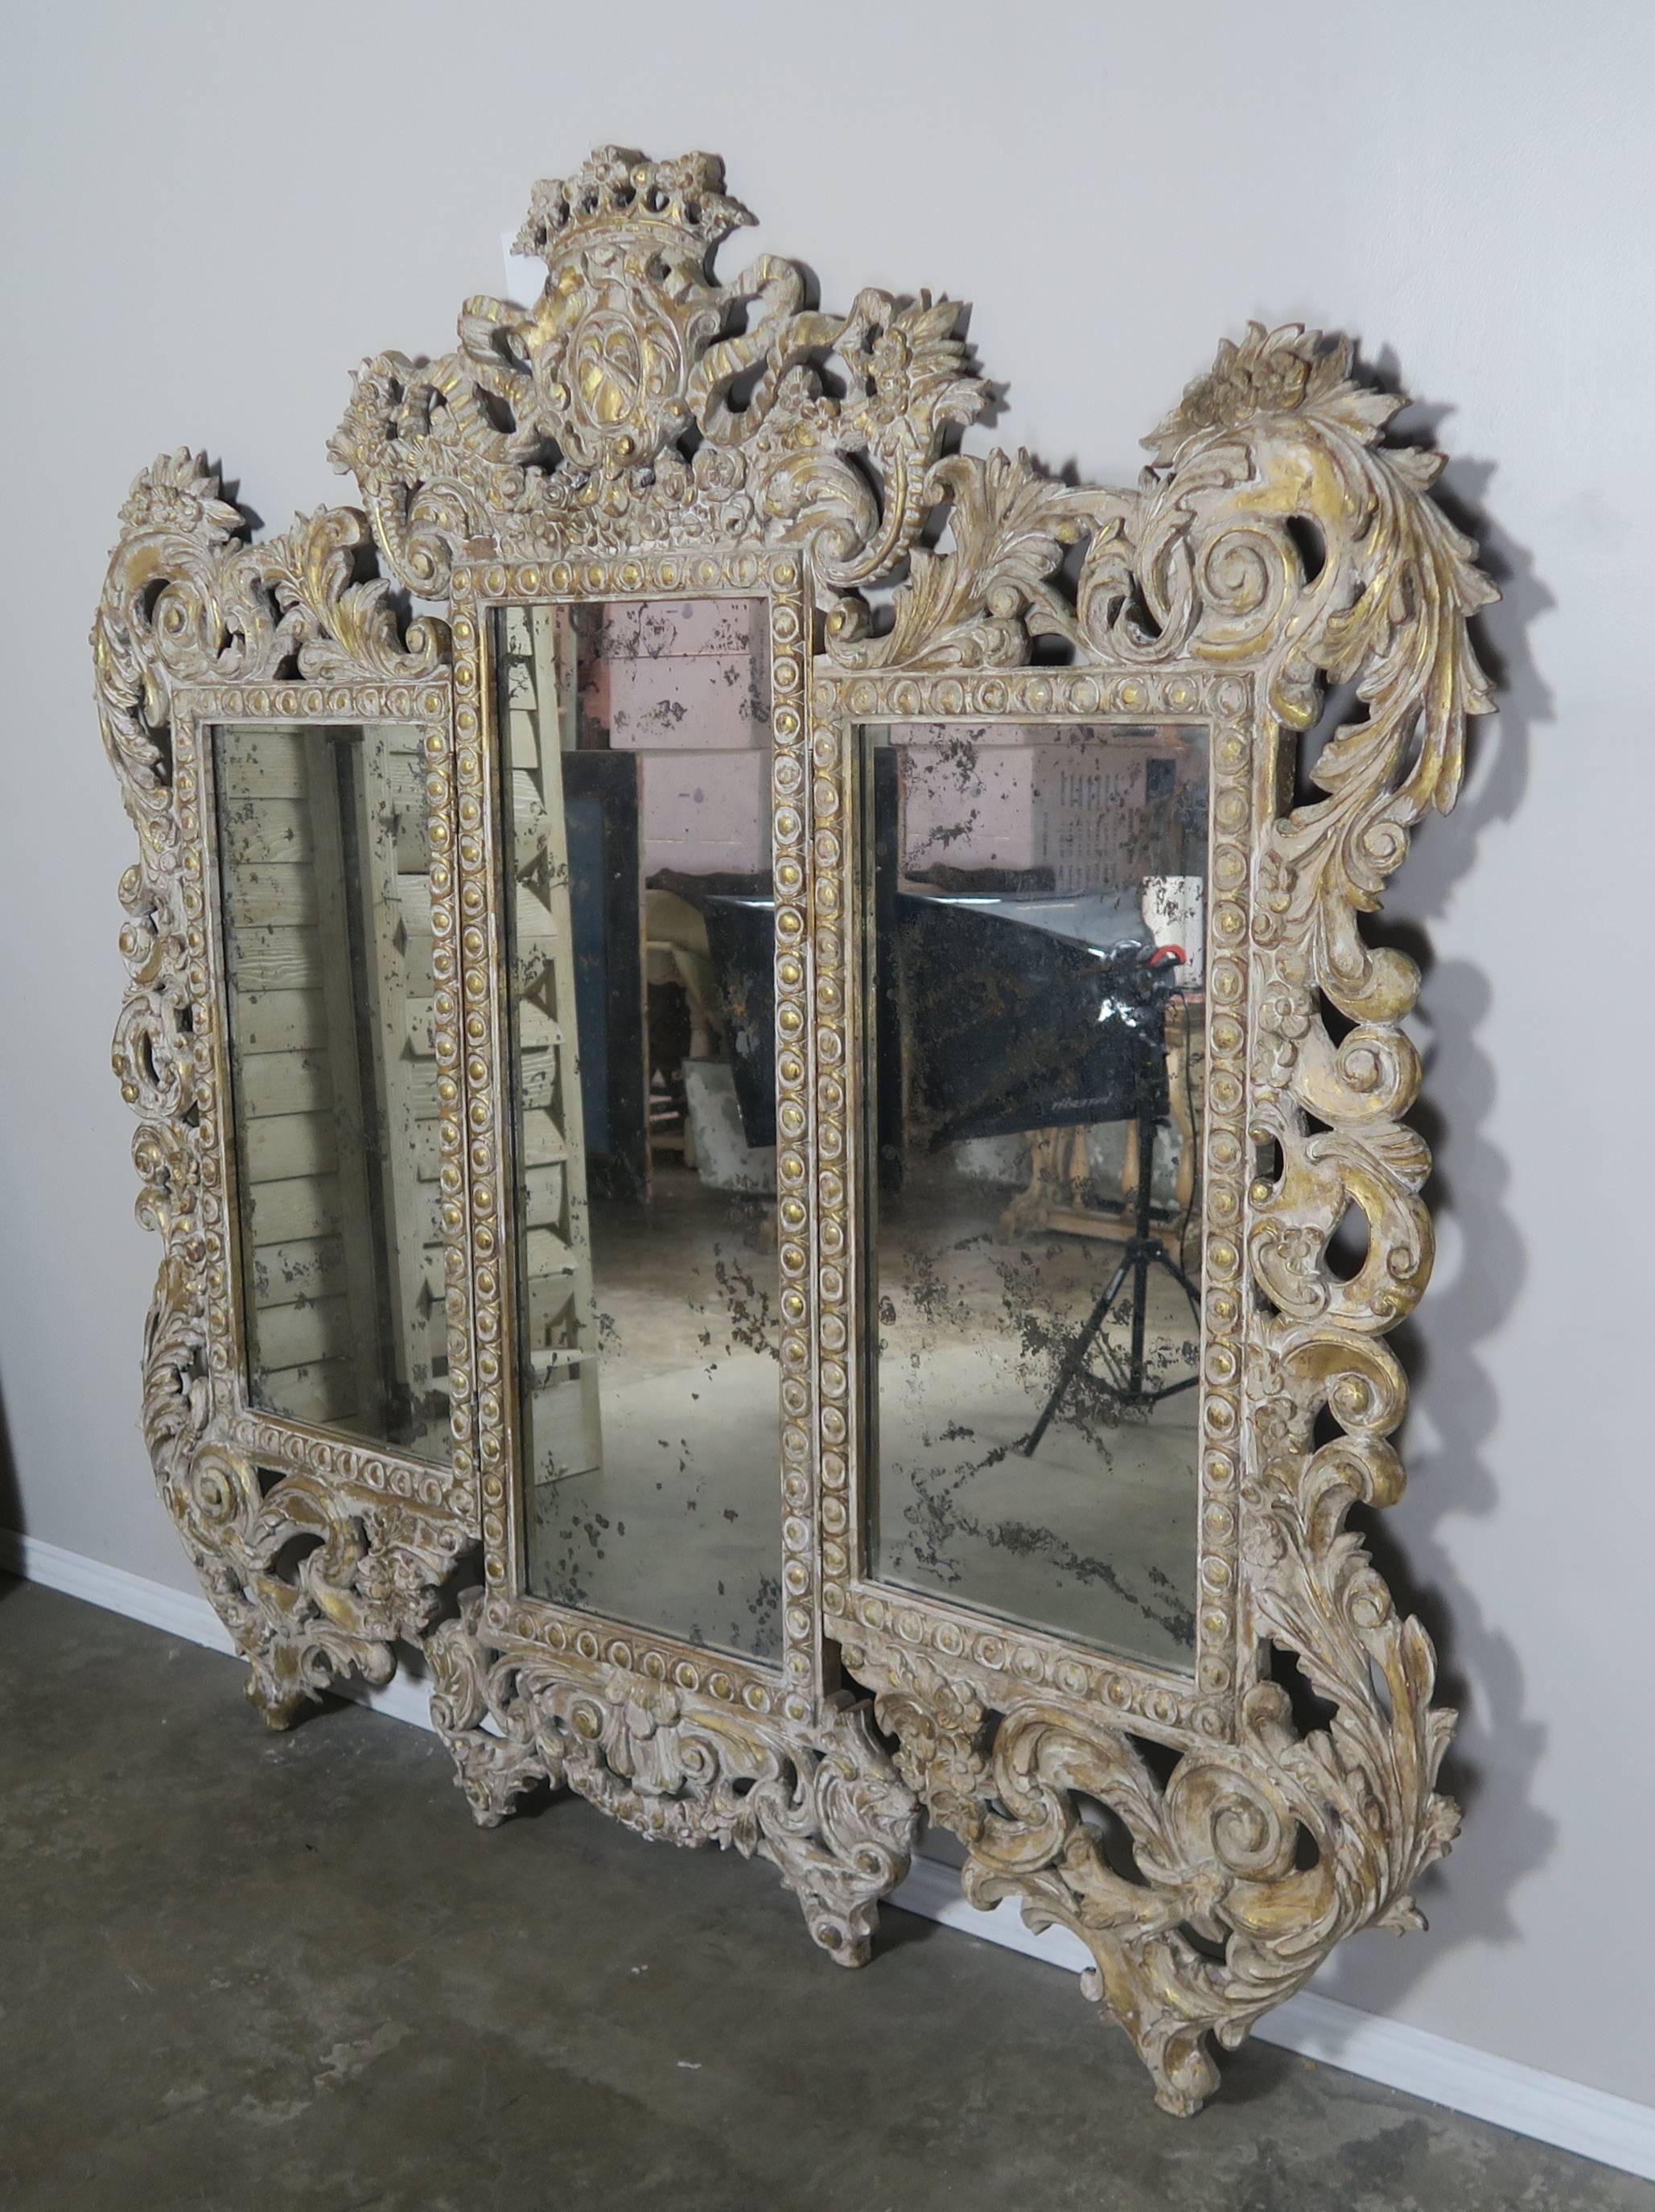 Carved painted and parcel-gilt Italian Rococo style mirror or screen. There is a crown and crest at the top of the mirror flanked by cornucopias and garlands of flowers. The frame is embellished with swirling acanthus leaves throughout. The panels